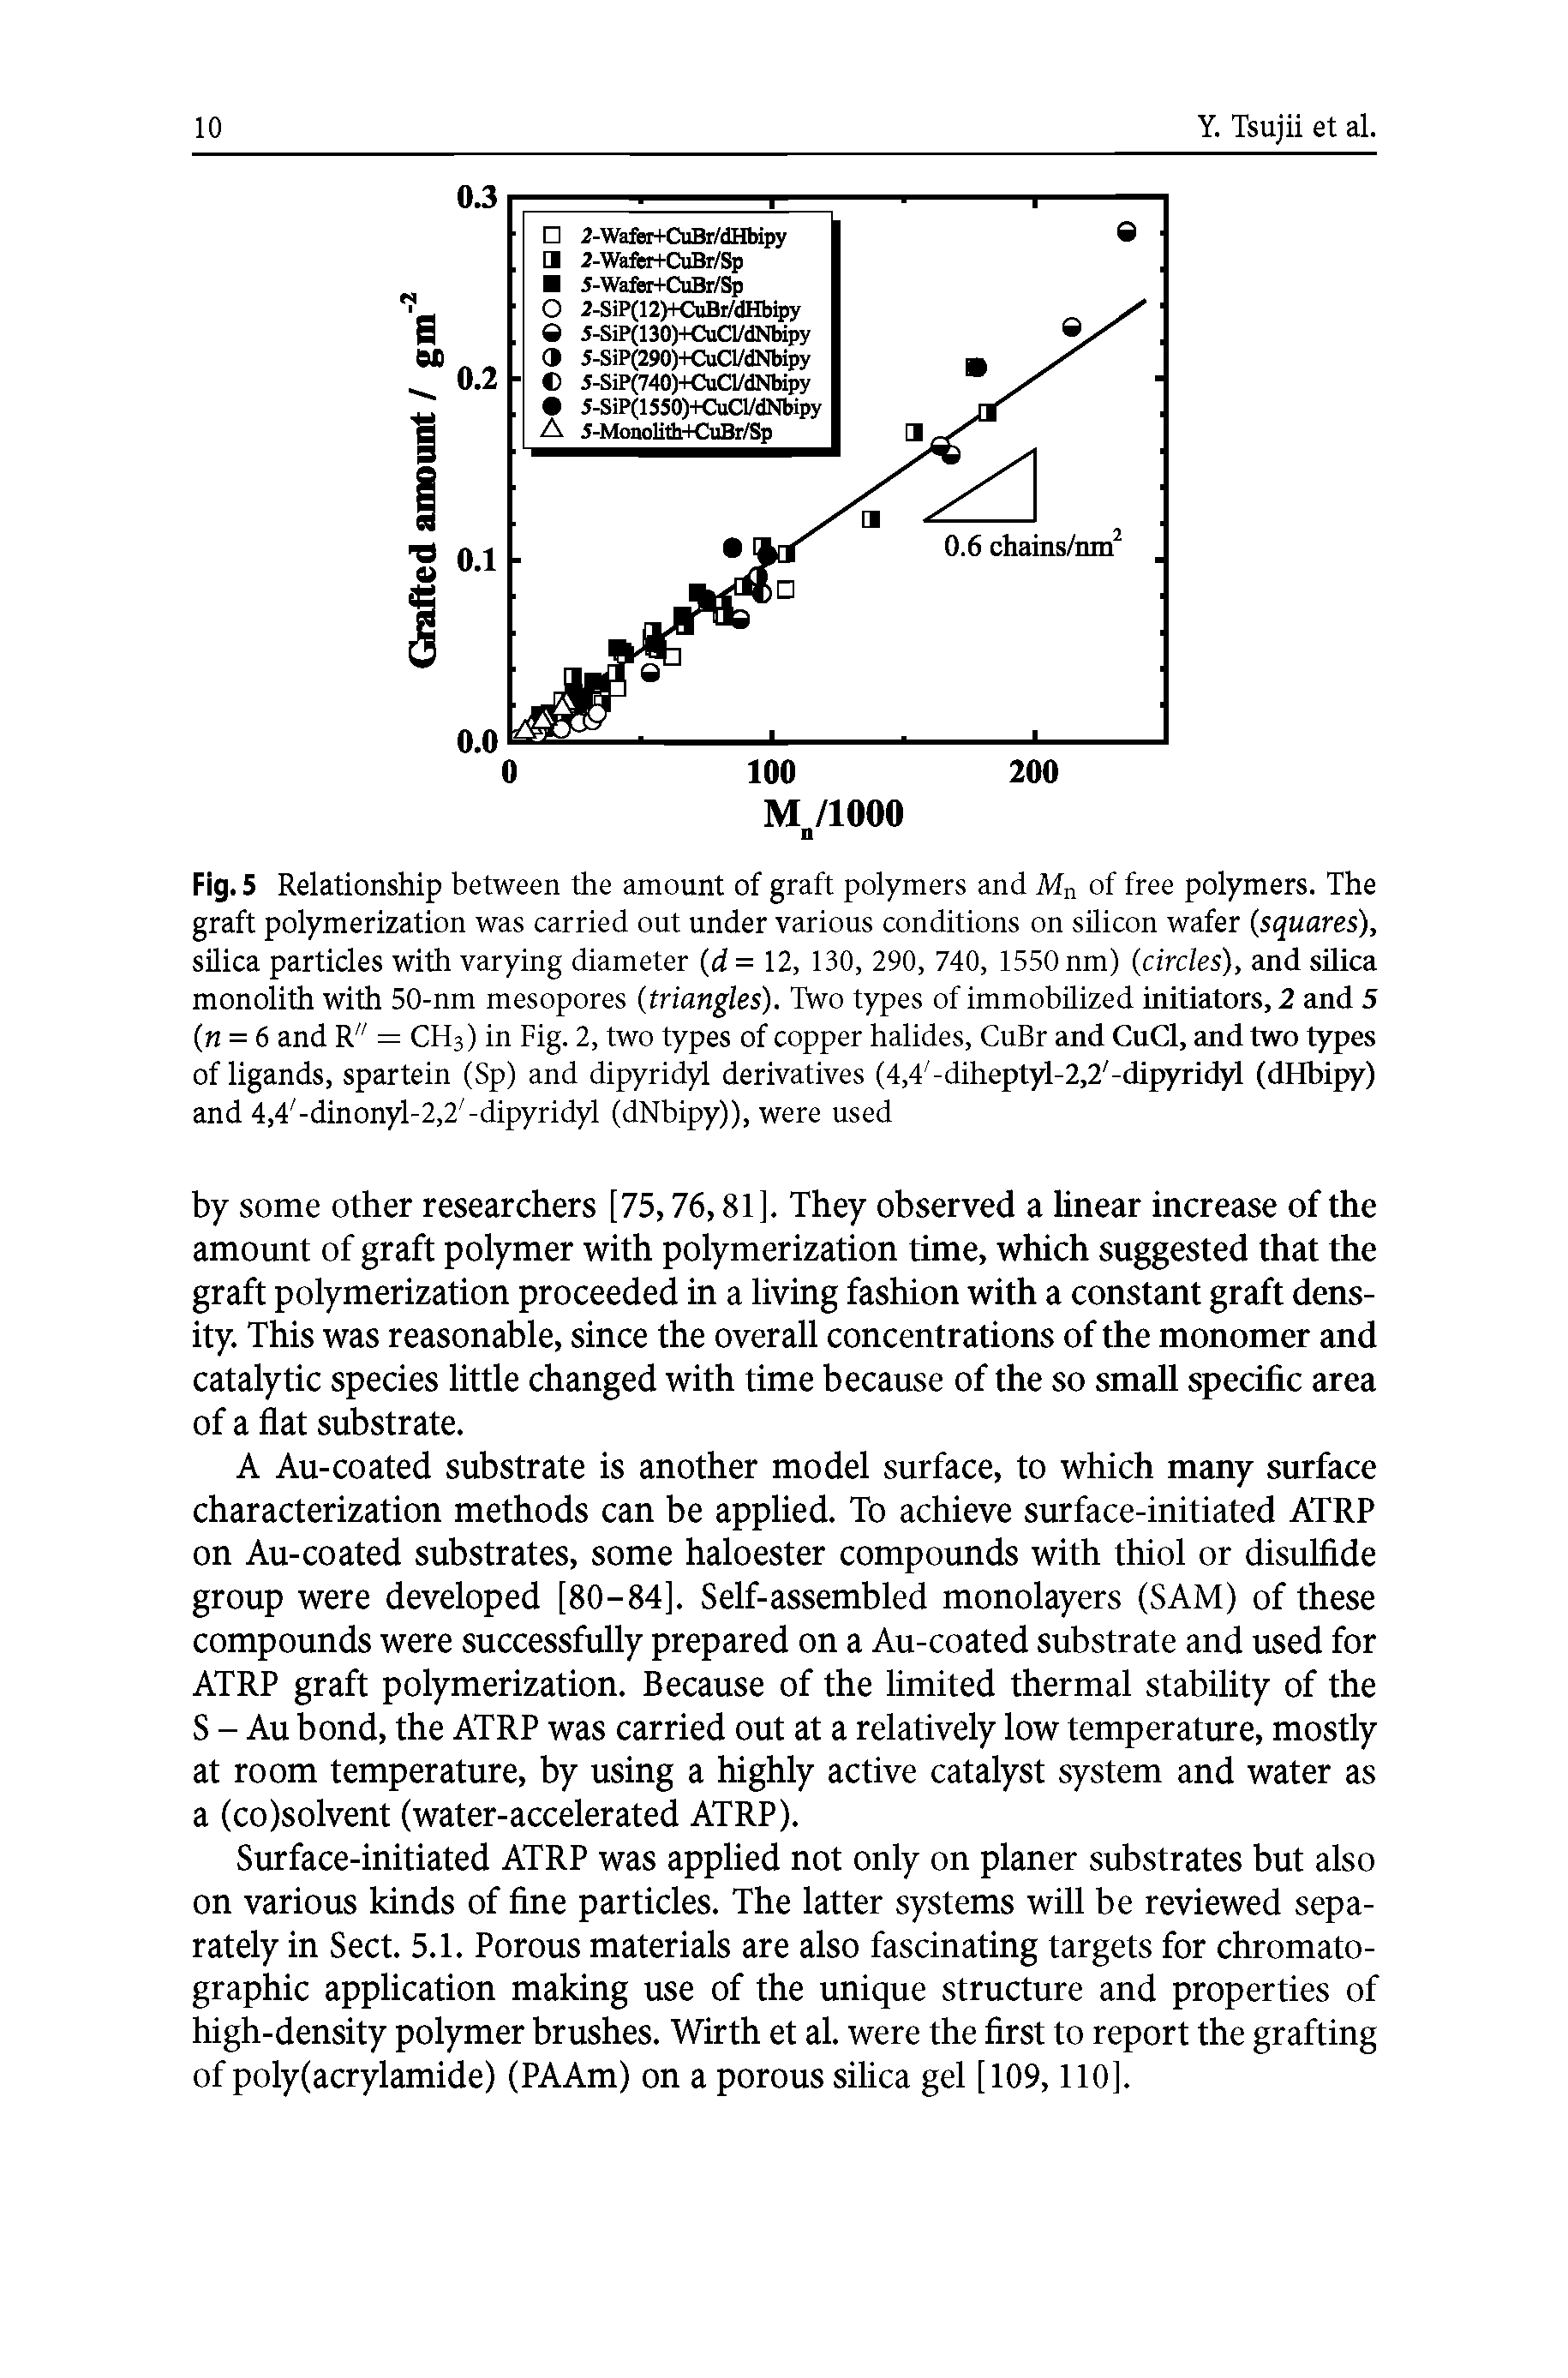 Fig. 5 Relationship between the amount of graft polymers and Mn of free polymers. The graft polymerization was carried out under various conditions on silicon wafer (squares), silica particles with varying diameter (d = 12, 130, 290, 740, 1550 nm) (circles), and silica monolith with 50-nm mesopores (triangles). Two types of immobilized initiators, 2 and 5 (n = 6 and R" = CH3) in Fig. 2, two types of copper halides, CuBr and CnCl, and two types of ligands, spartein (Sp) and dipyridyl derivatives (4,4 -diheptyl-2,2 -dipyridyl (dHbipy) and 4,4 -dinonyl-2,2 -dipyridyl (dNbipy)), were used...